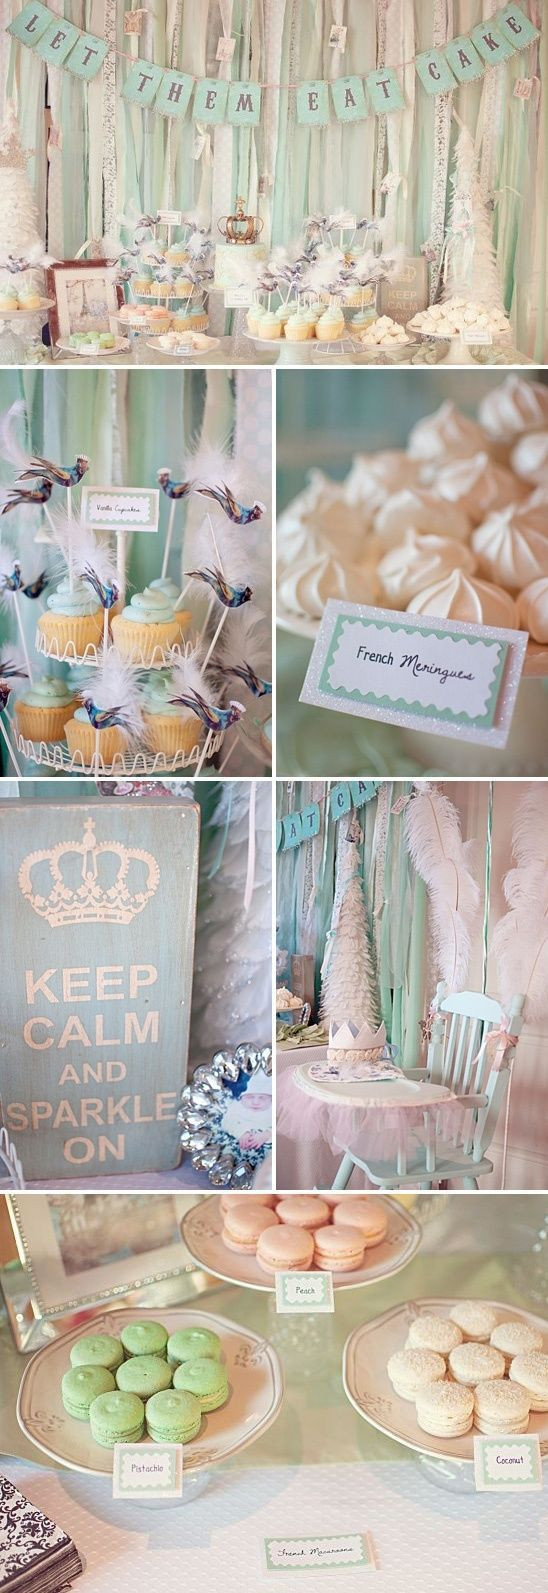 Teenage Birthday Party Ideas In Winter
 Pin on party